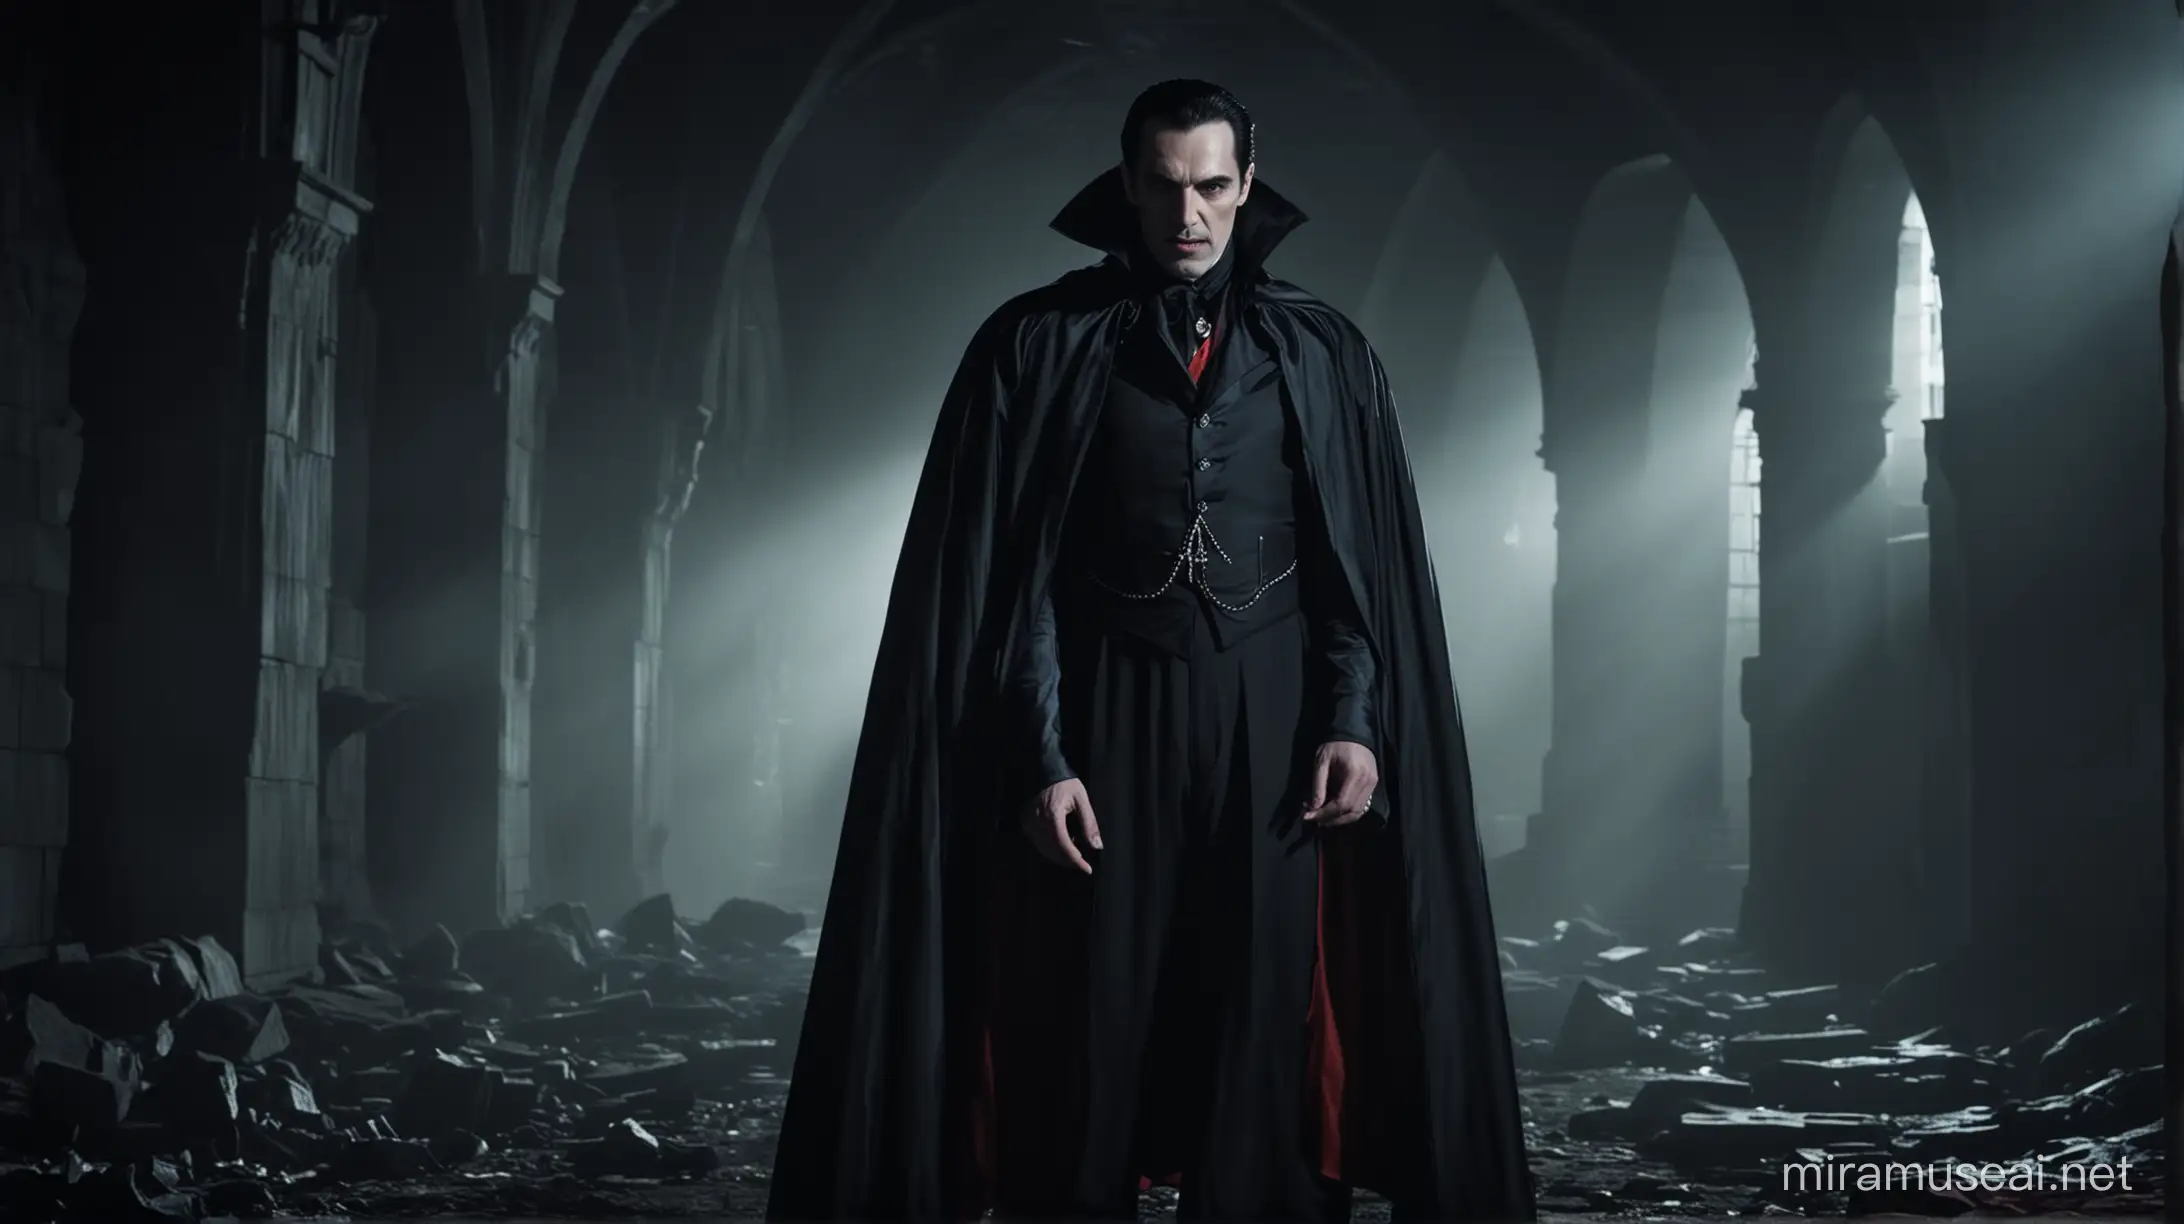 Count Dracula in a Dark and Haunting Lair